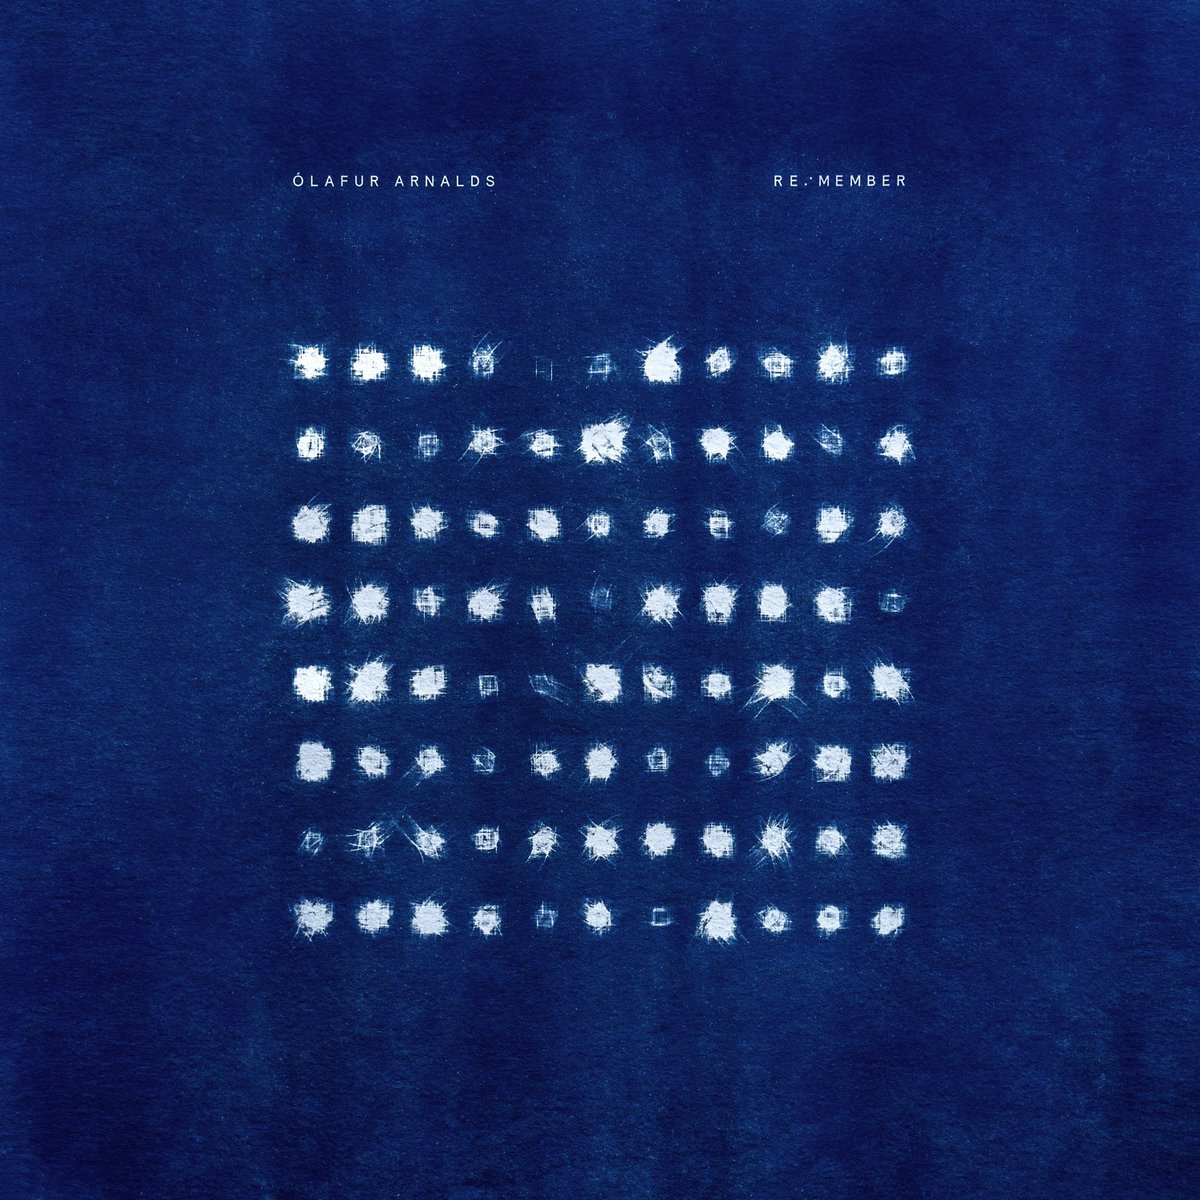 're:member' by olafur arnalds album review by Andy Resto